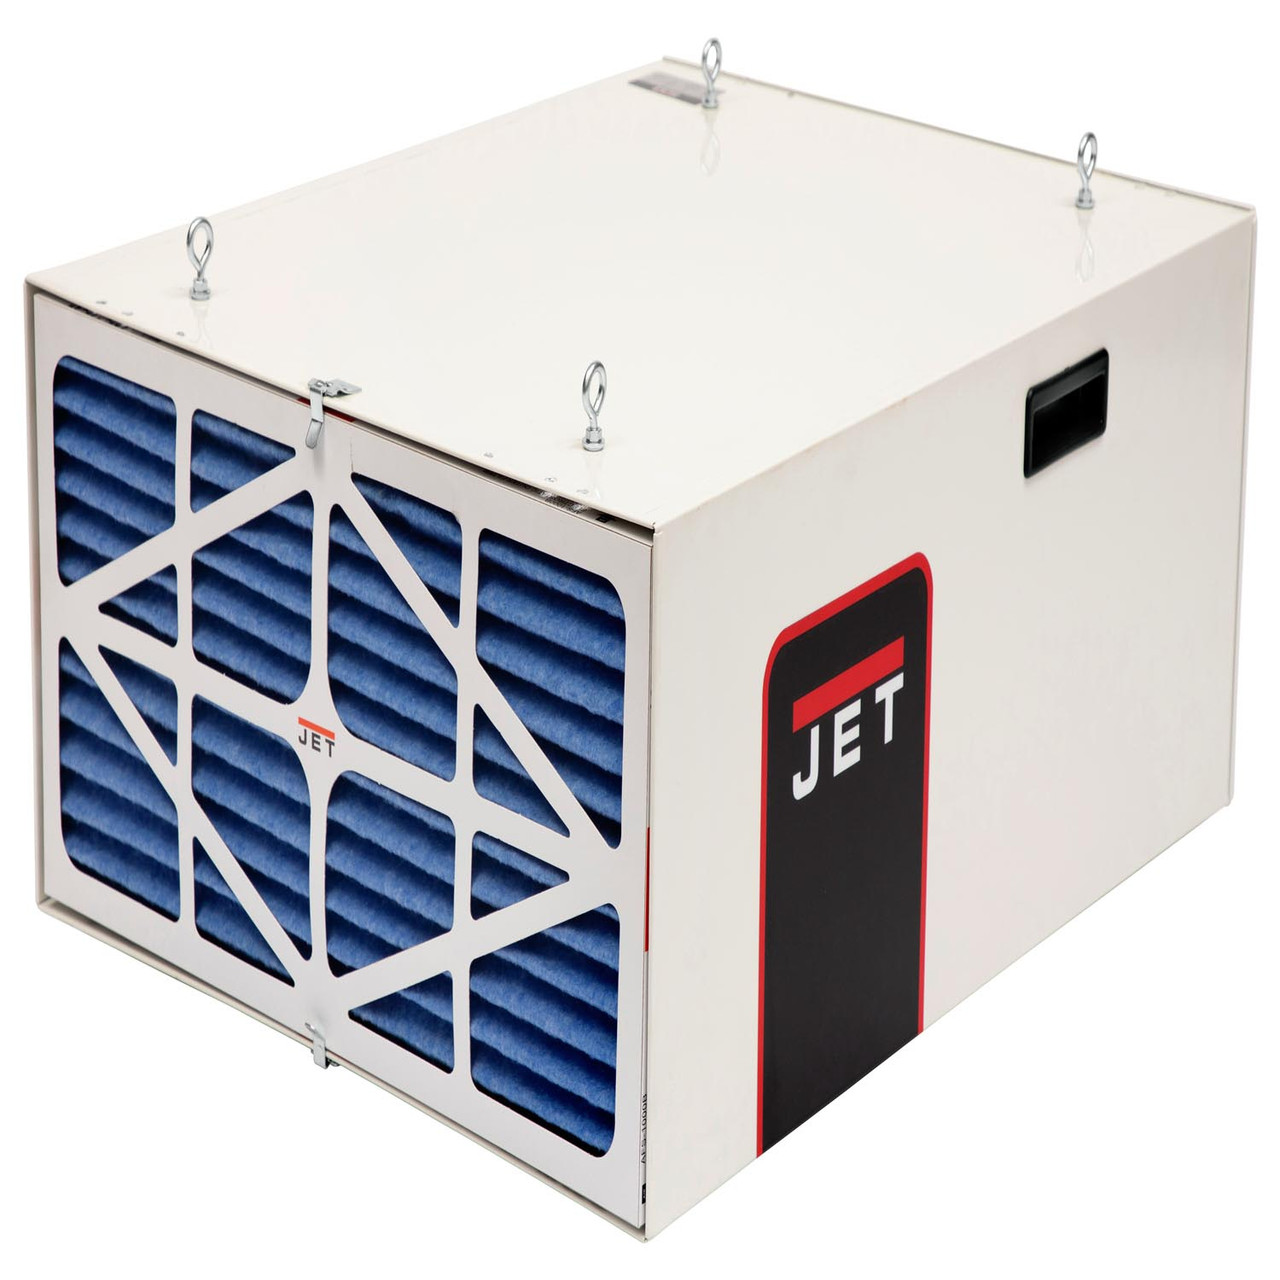 Jet, AFS-1000B, 1000 CFMAir Filtration System, 3-Speed, with Remote Control